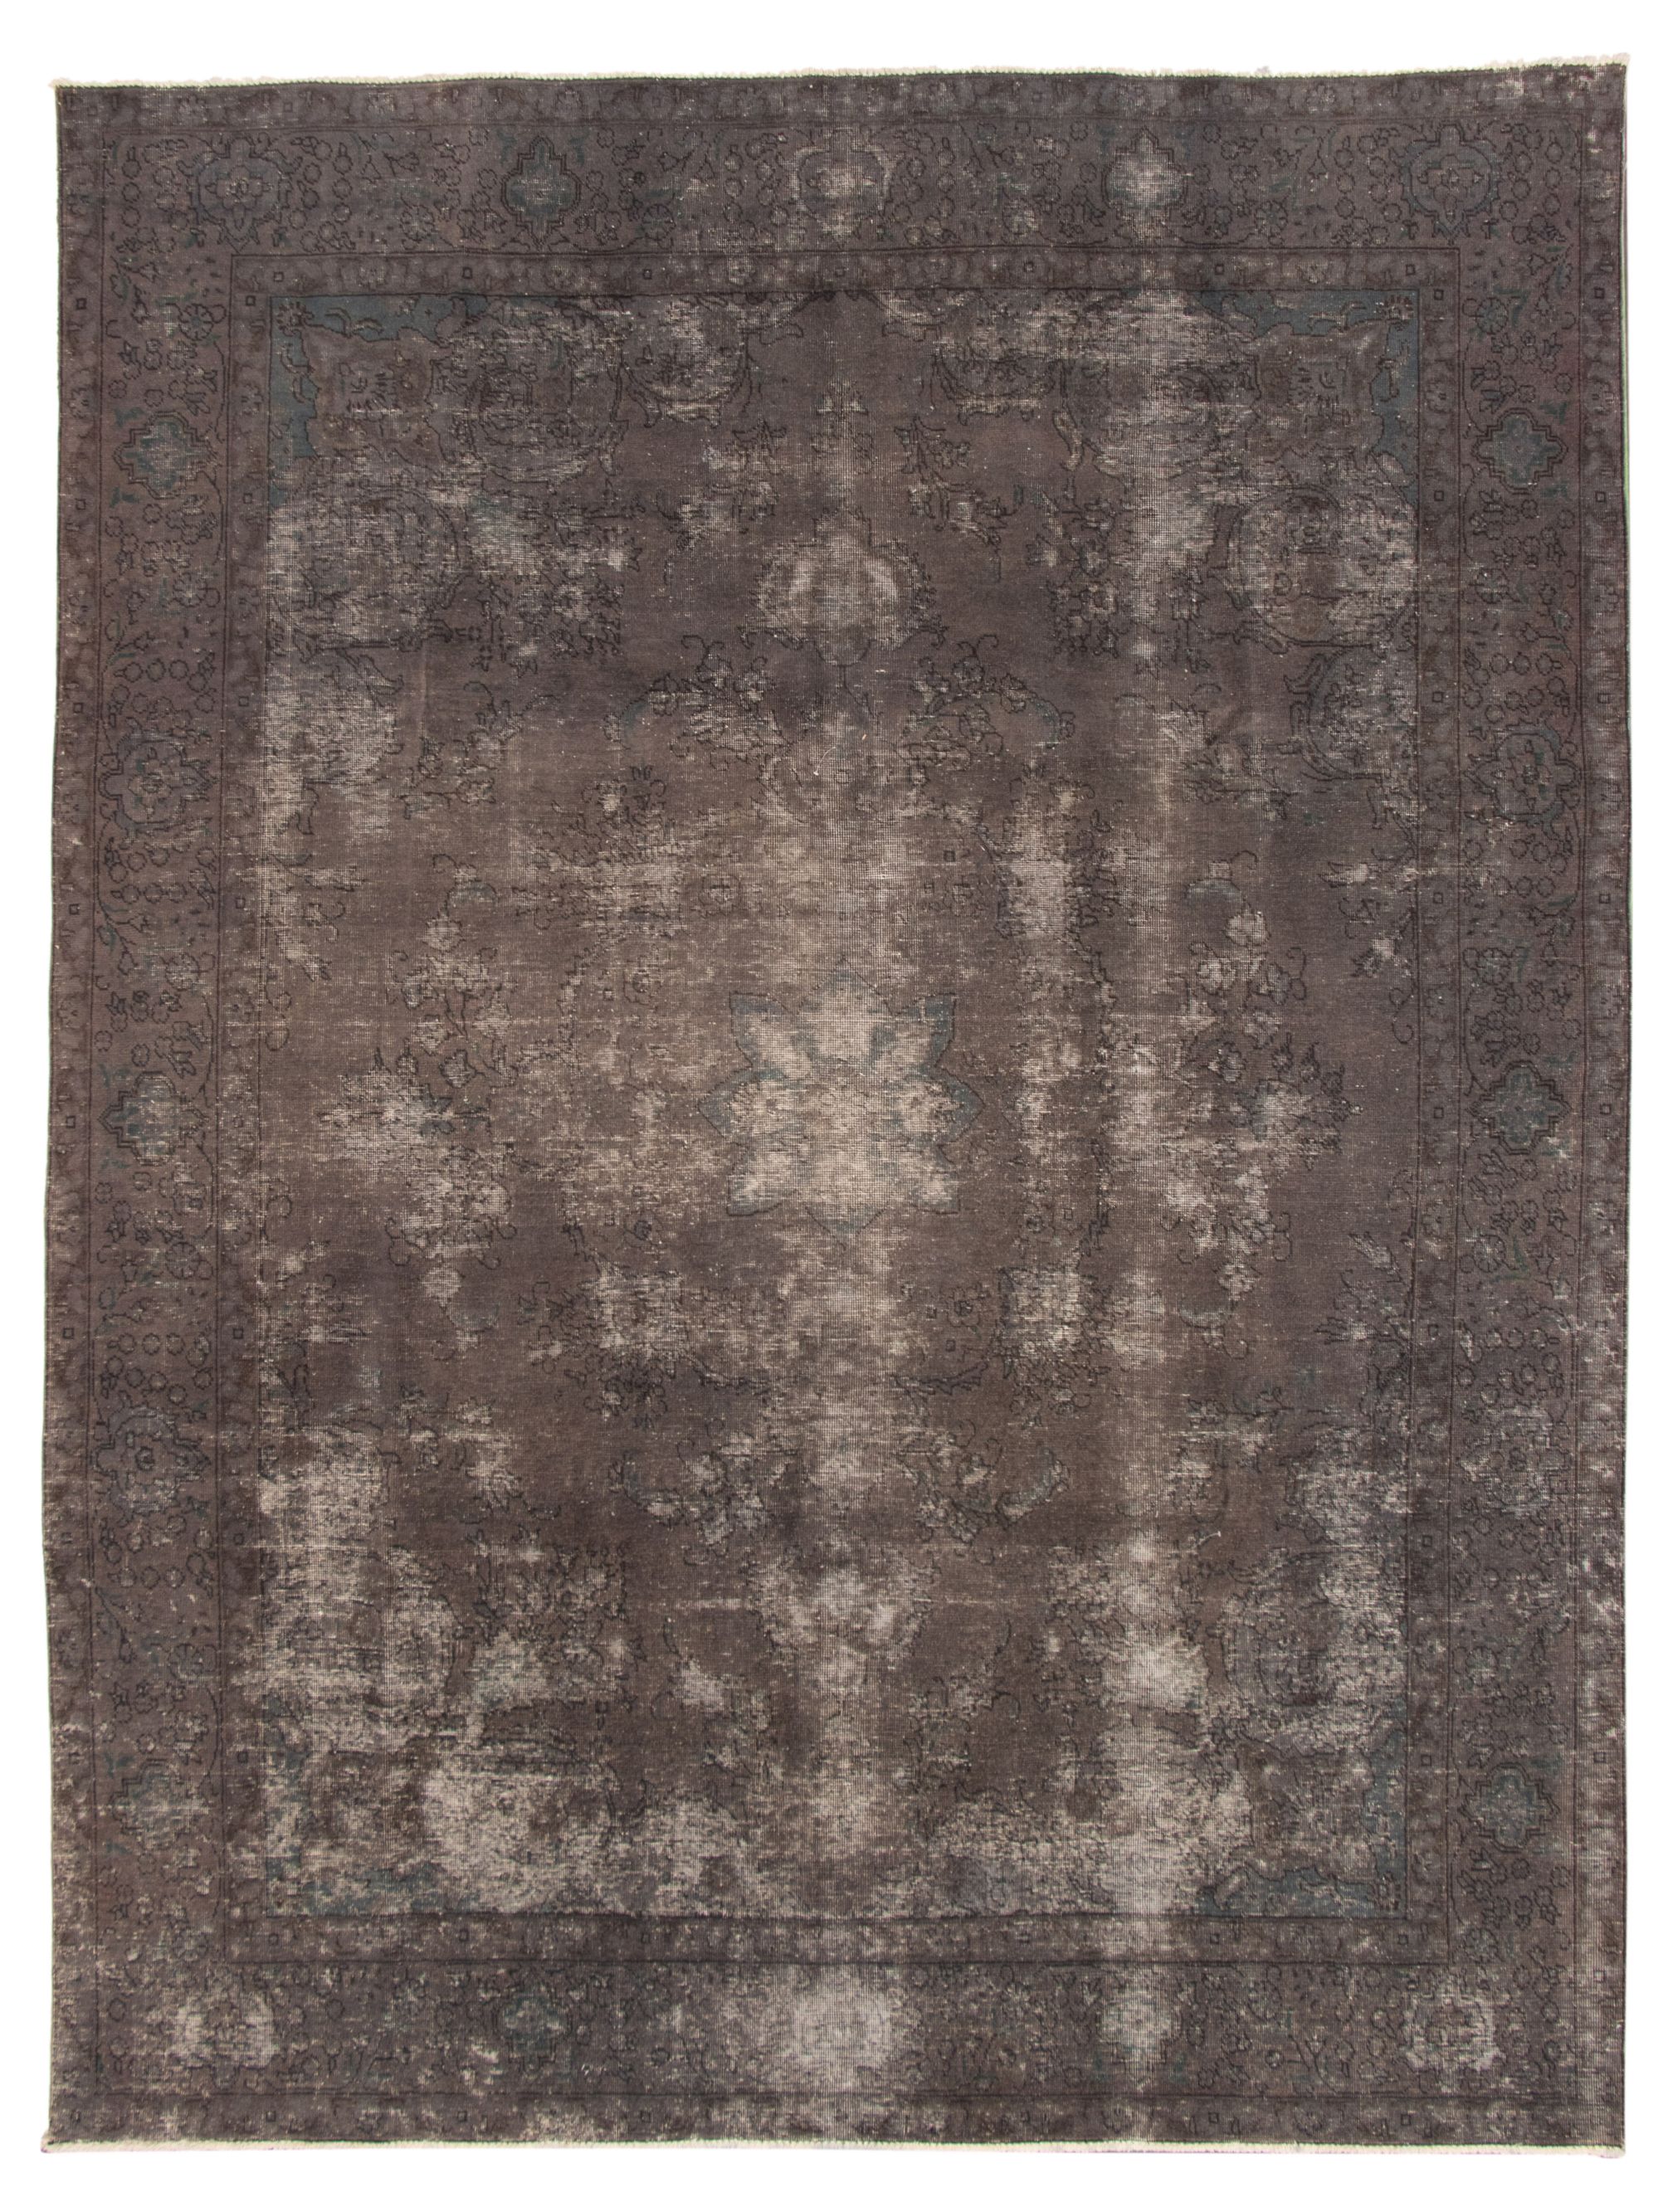 Hand-knotted Color Transition Dark Grey Wool Rug 9'10" x 12'10" Size: 9'10" x 12'10"  